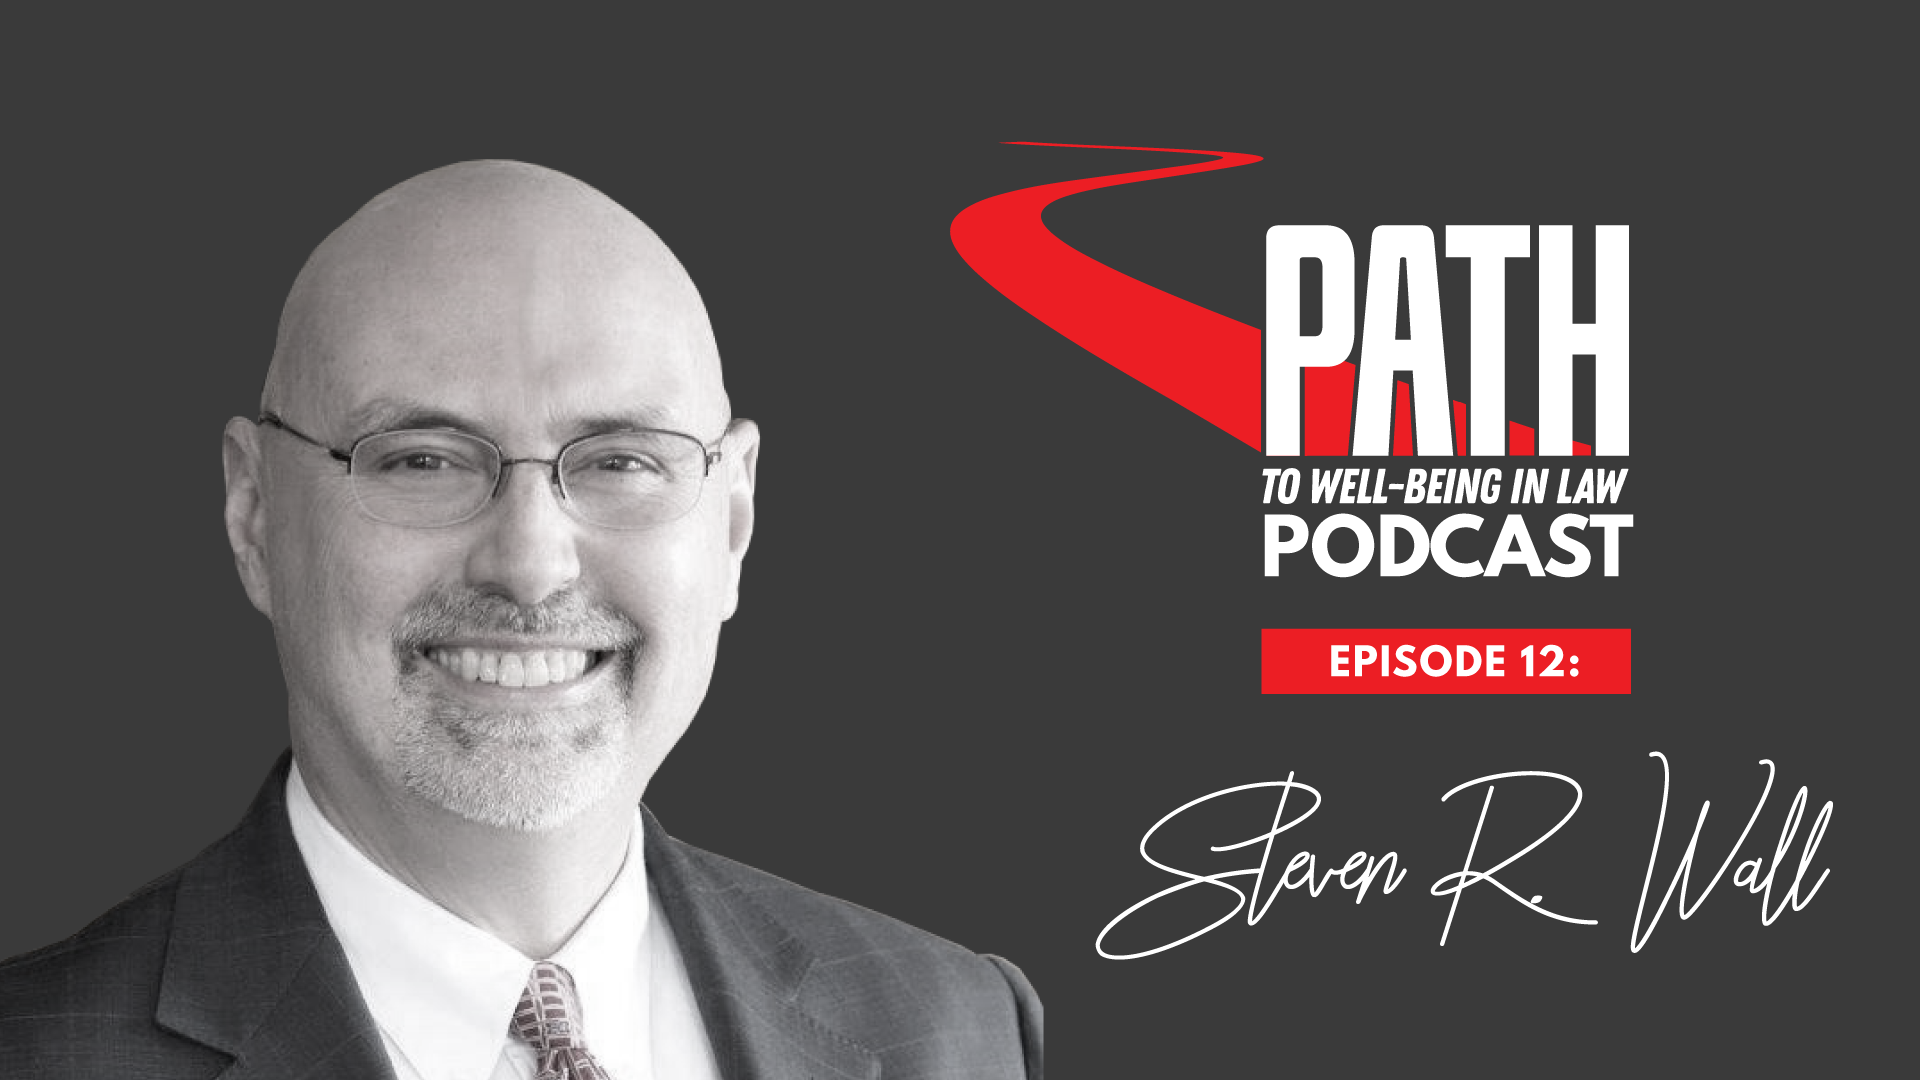 Path To Well-Being In Law Podcast: Episode 12 - Steven Wall